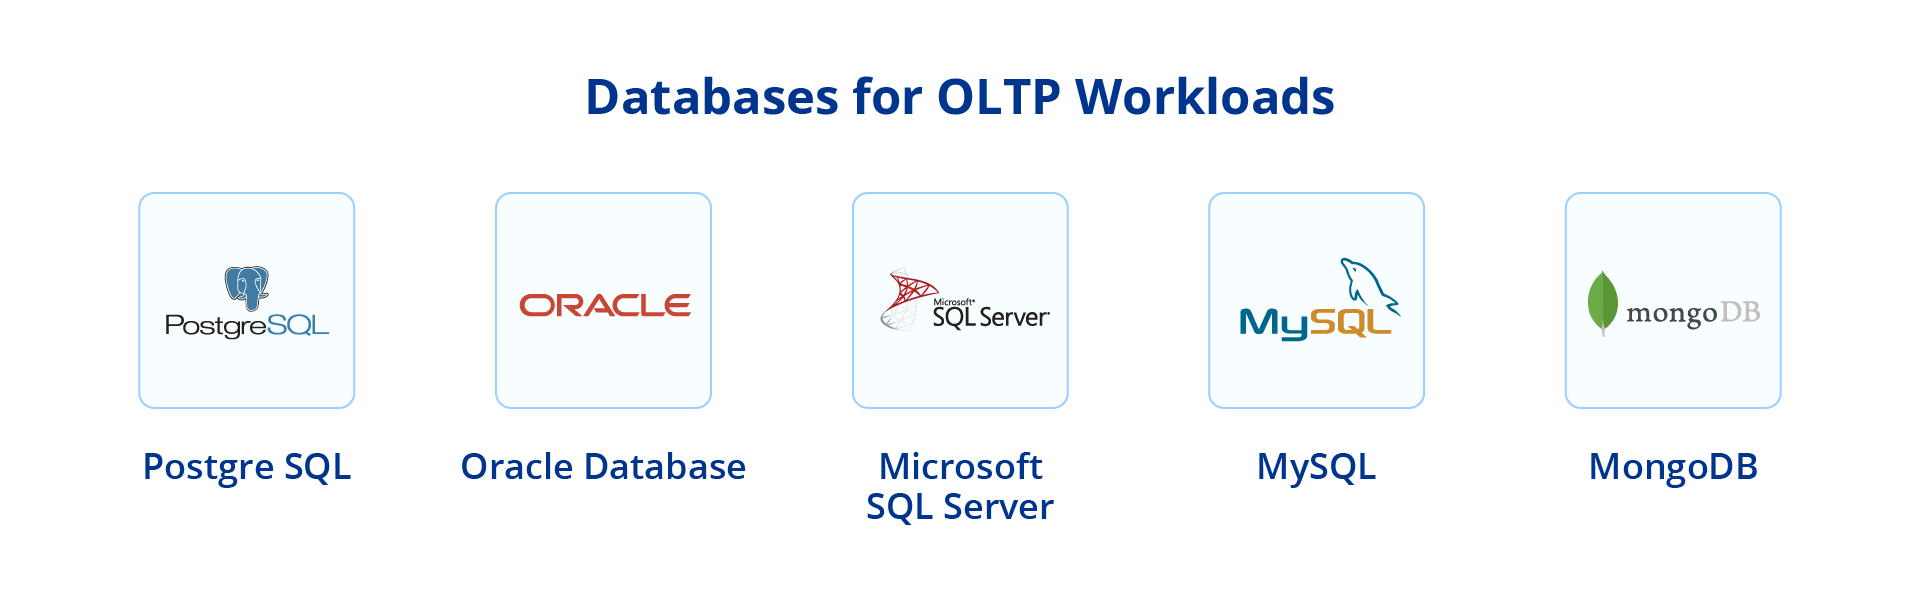 An image listing databases for OLTP workloads.